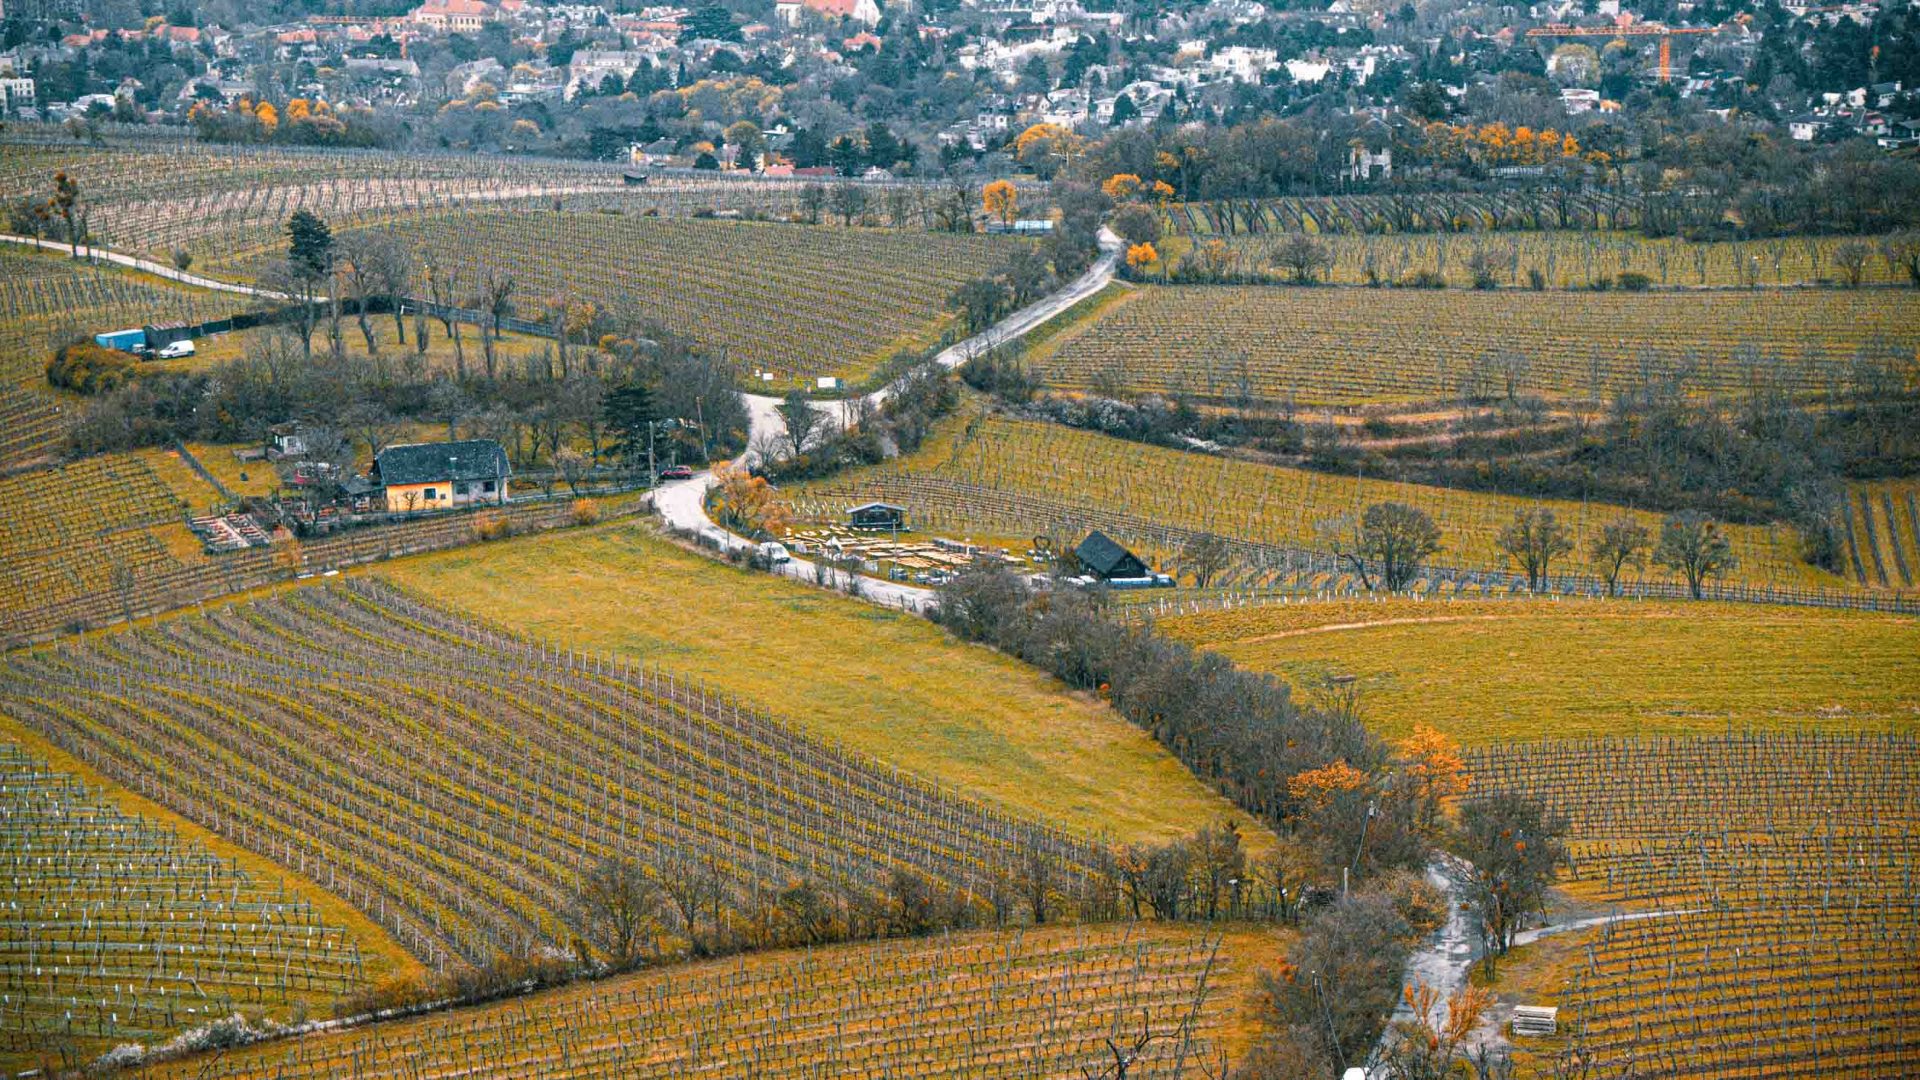 Farmland in the city of Vienna showing rows of cultivated land and a small house.